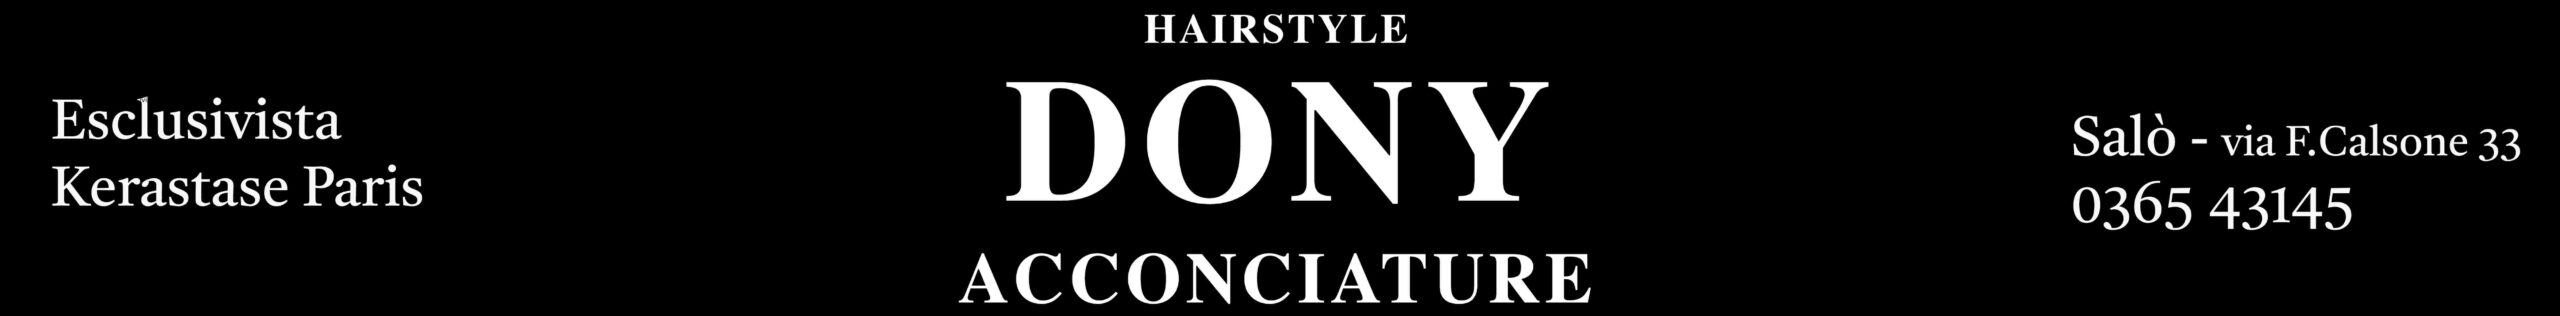 Dony acconciature